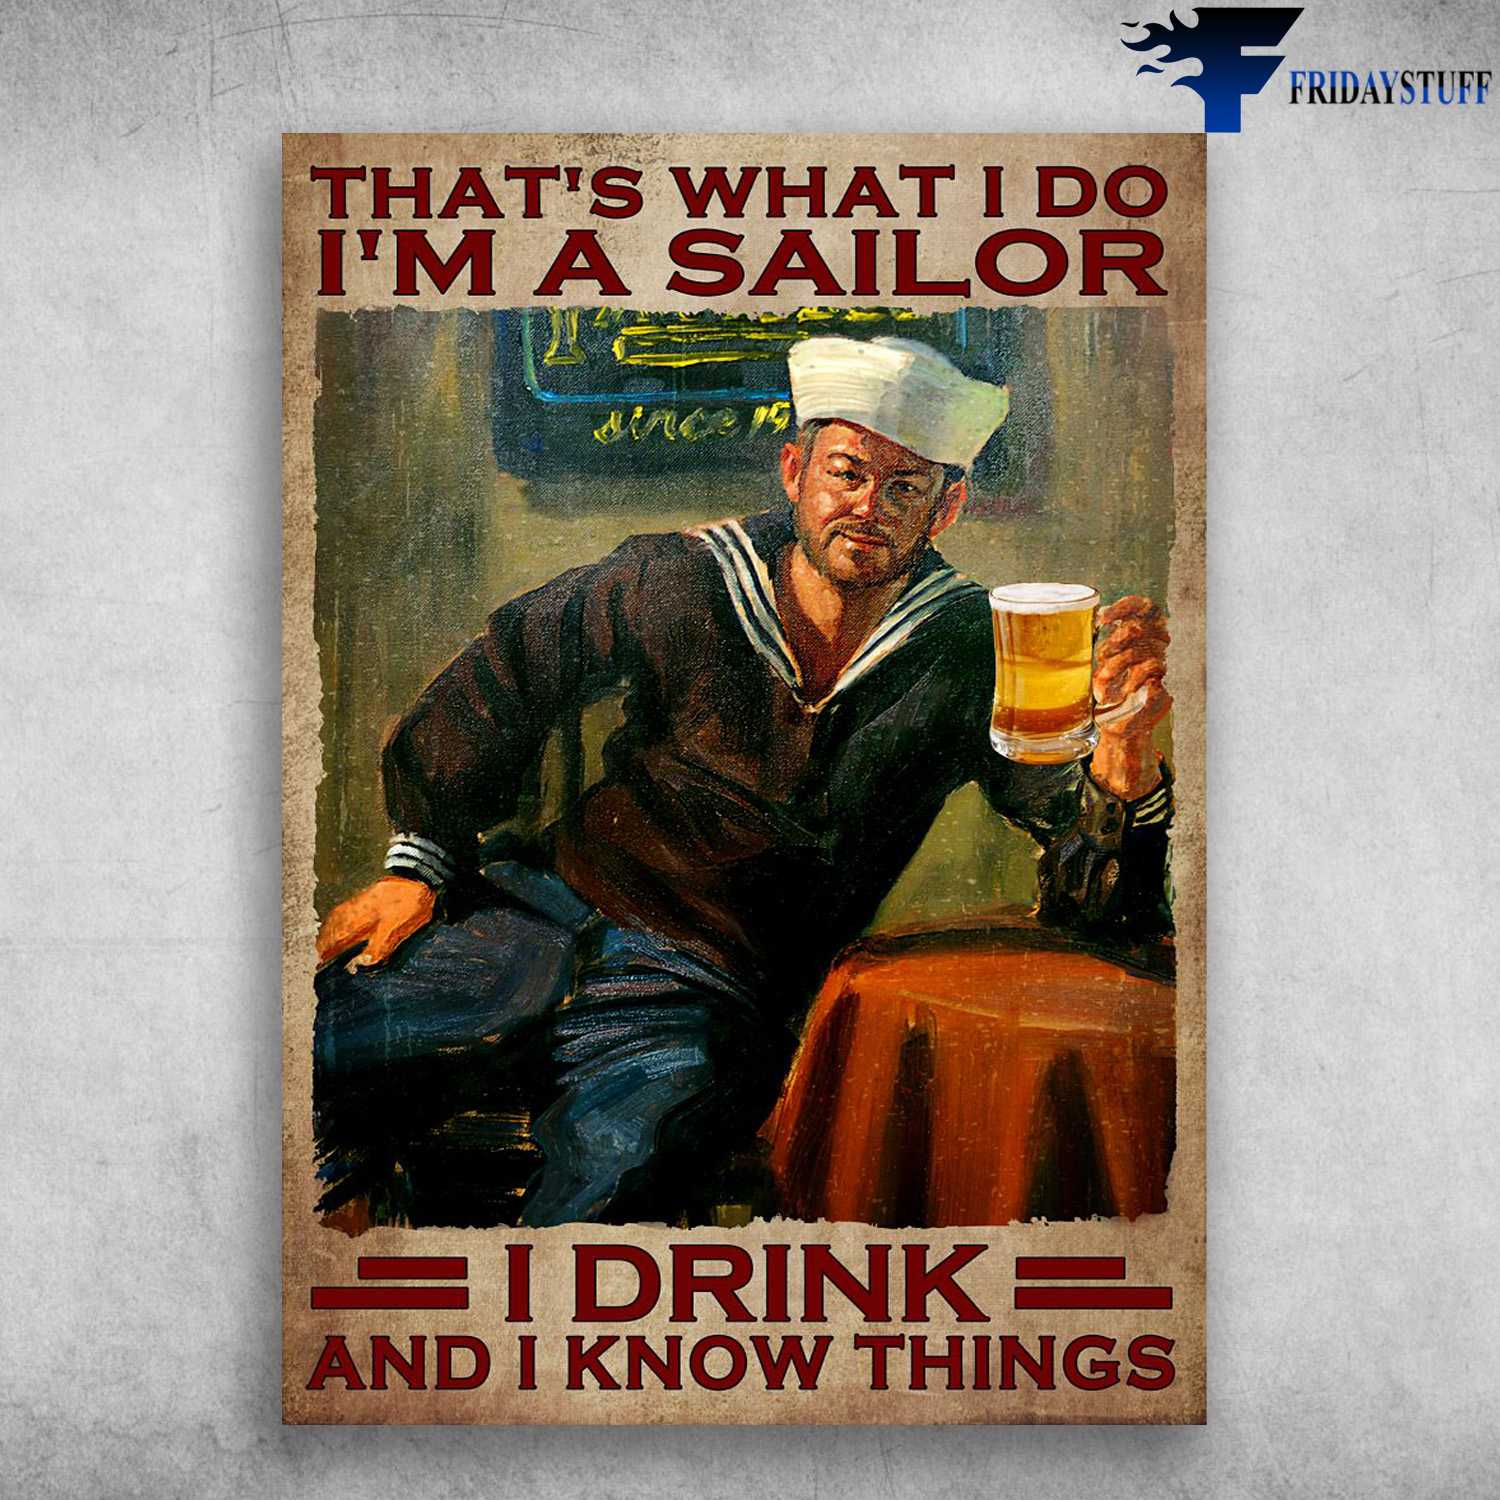 Sailor Drinks Beer, That's What I Do, I'm A Sailor, I Drink, And I Know Things